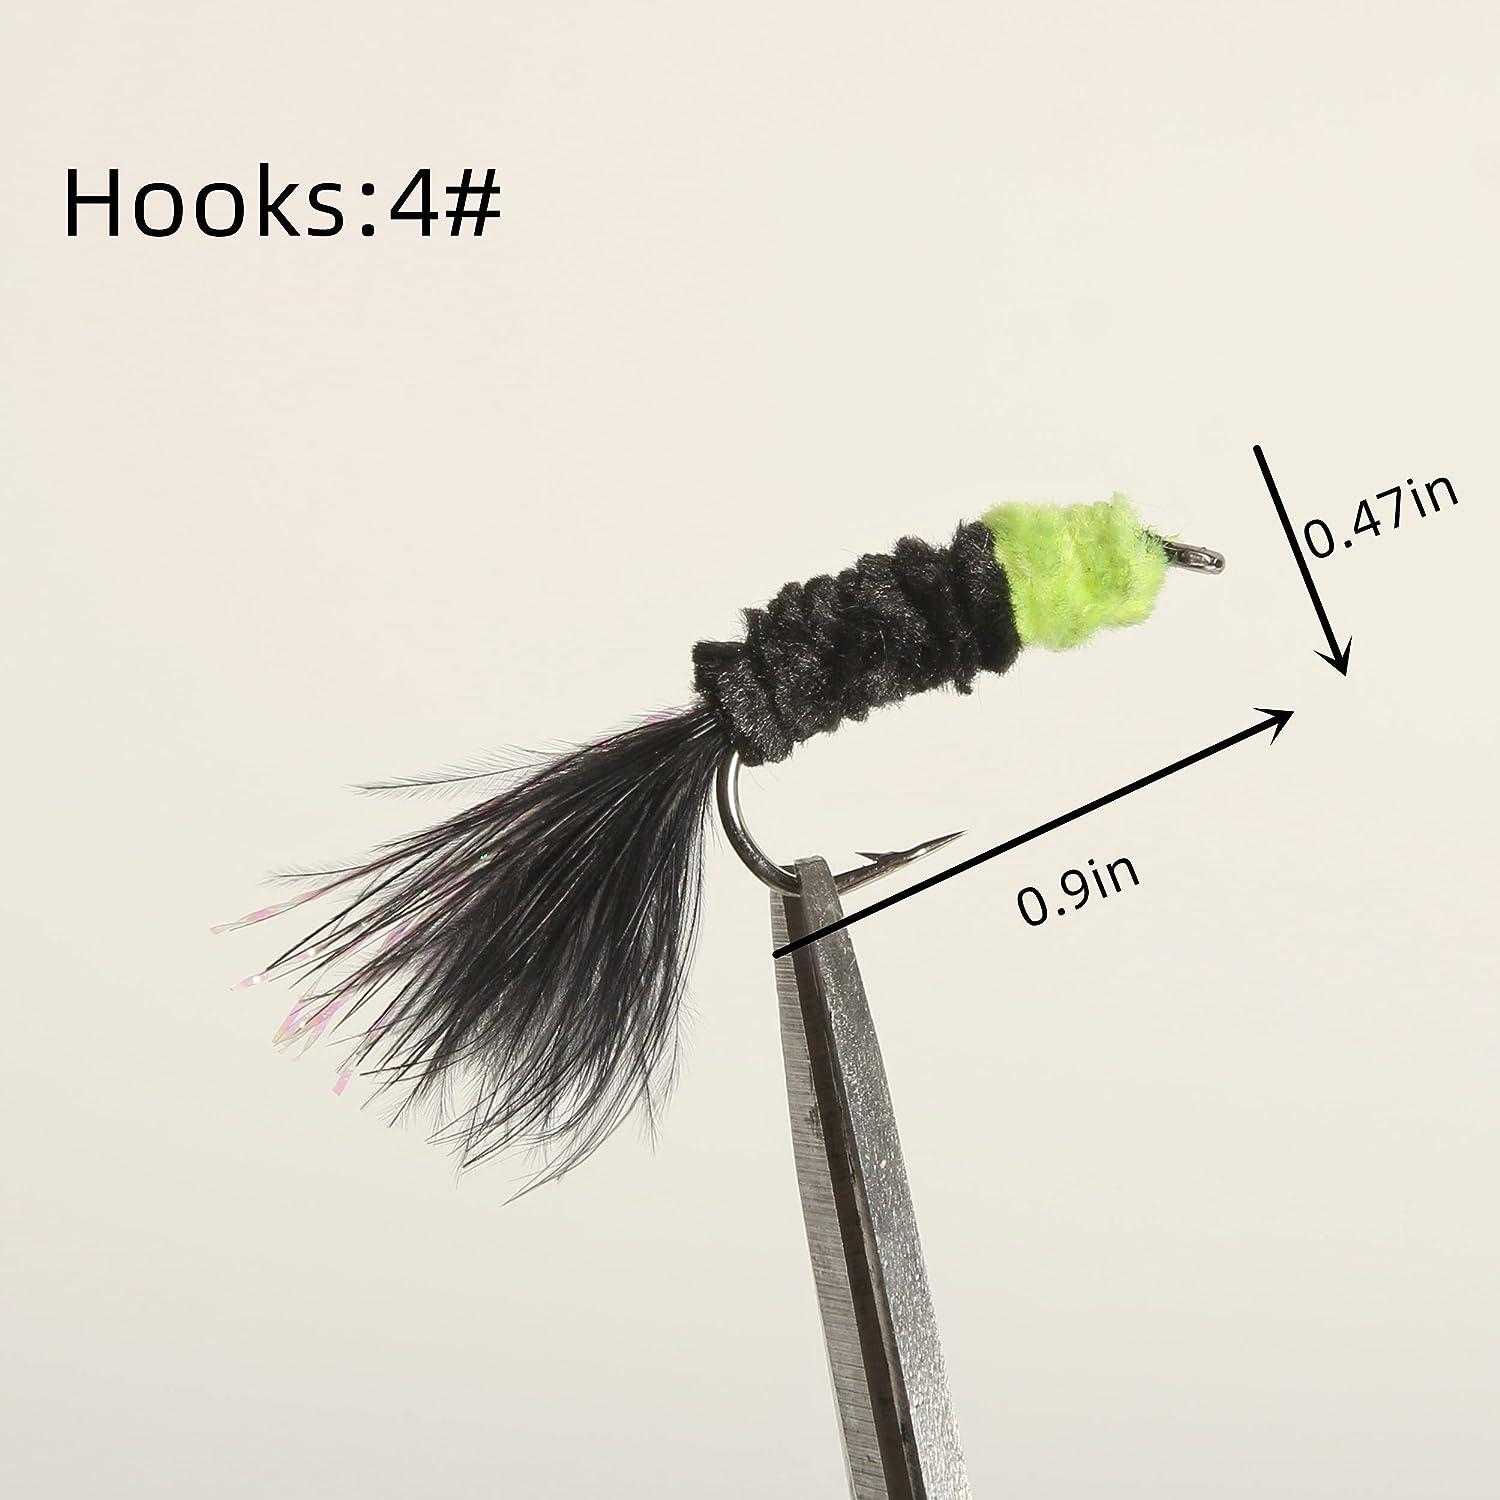 Dropship Insects Flies Fishing Lures; Topwater Dry Flies Bait Trout  Artificial Crank Hook; Fishing Tackle to Sell Online at a Lower Price